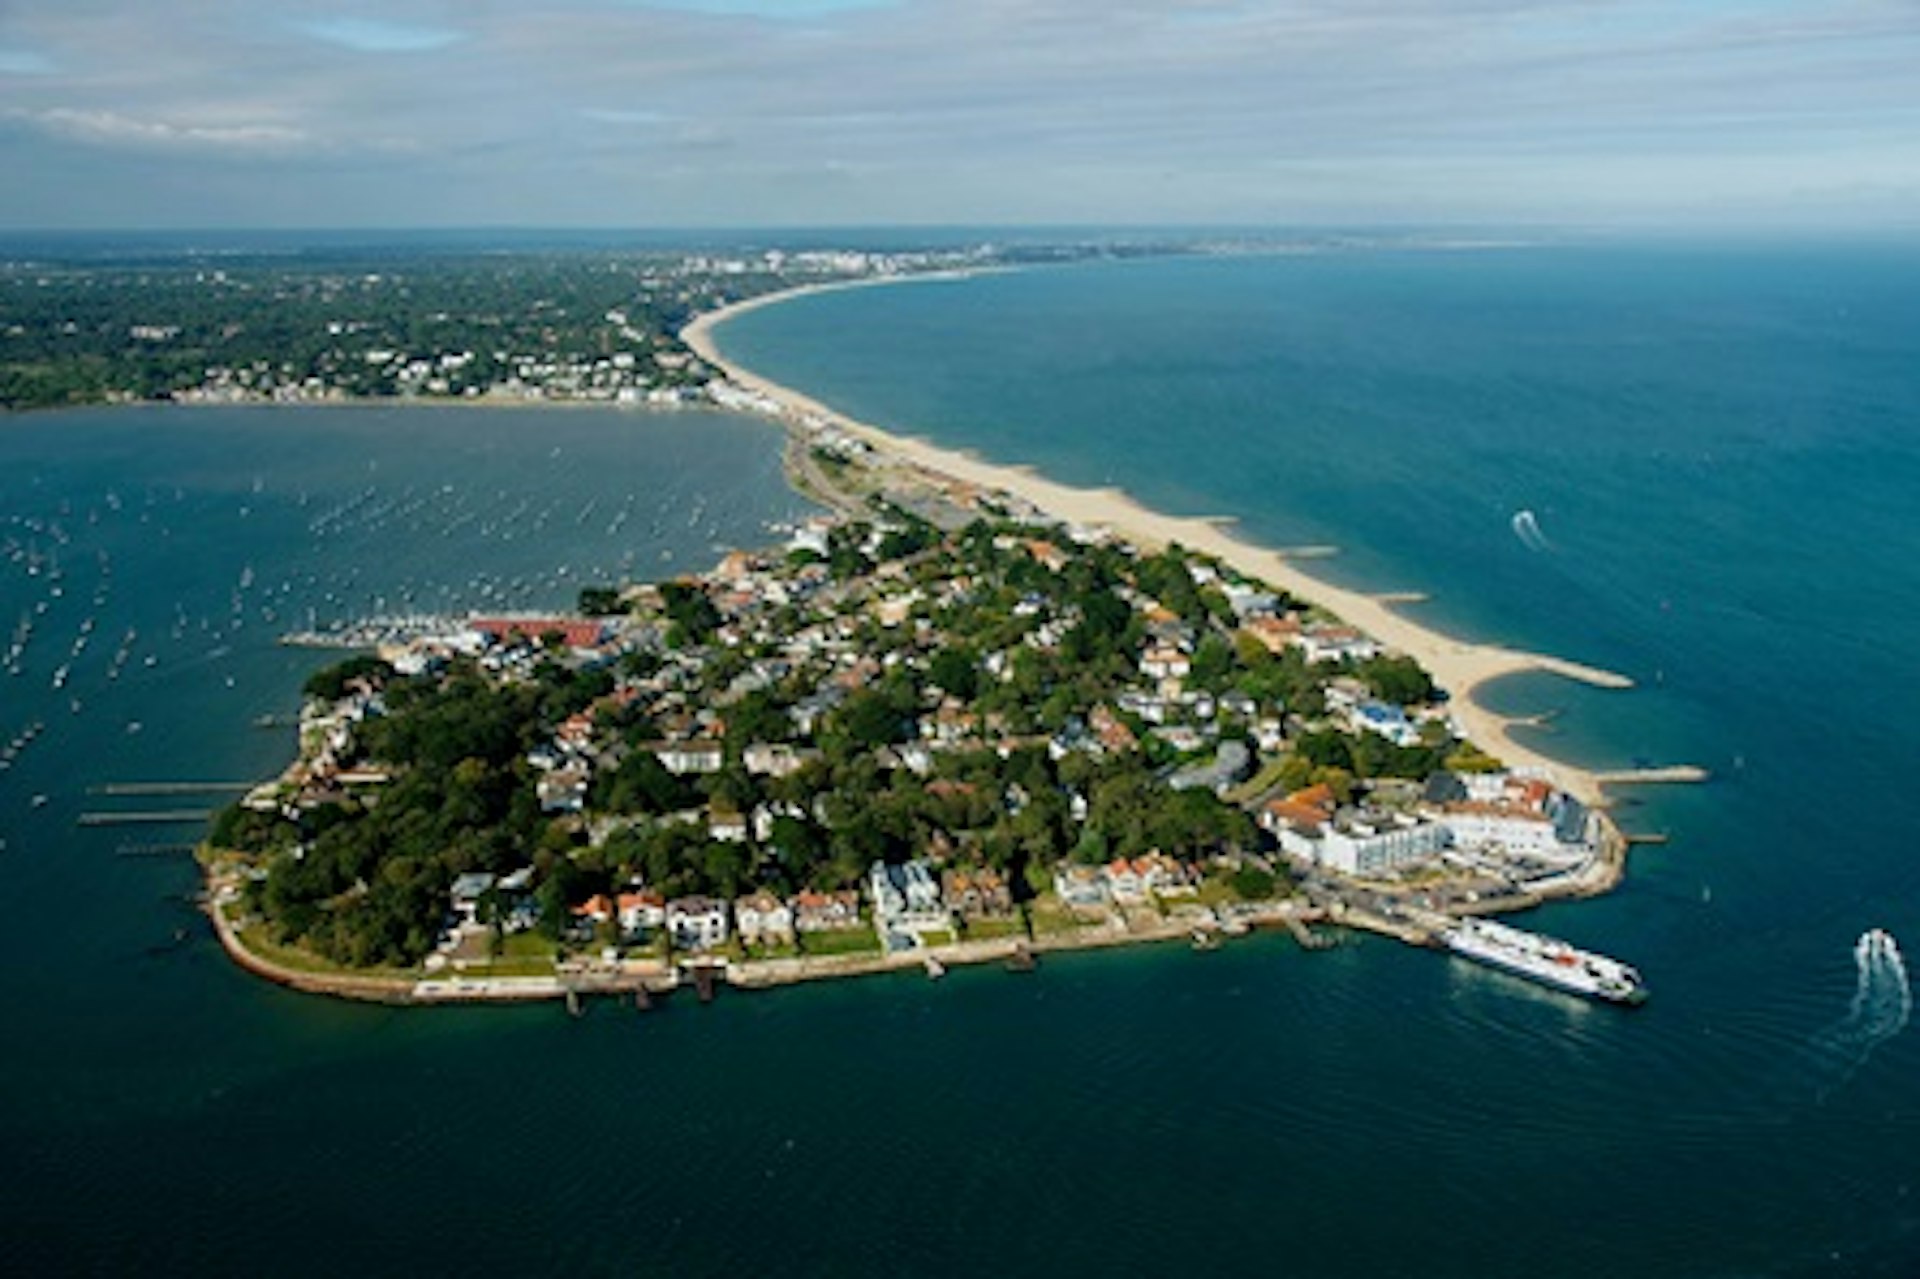 Two Night Break for Two at Sandbanks Hotel, Poole 4